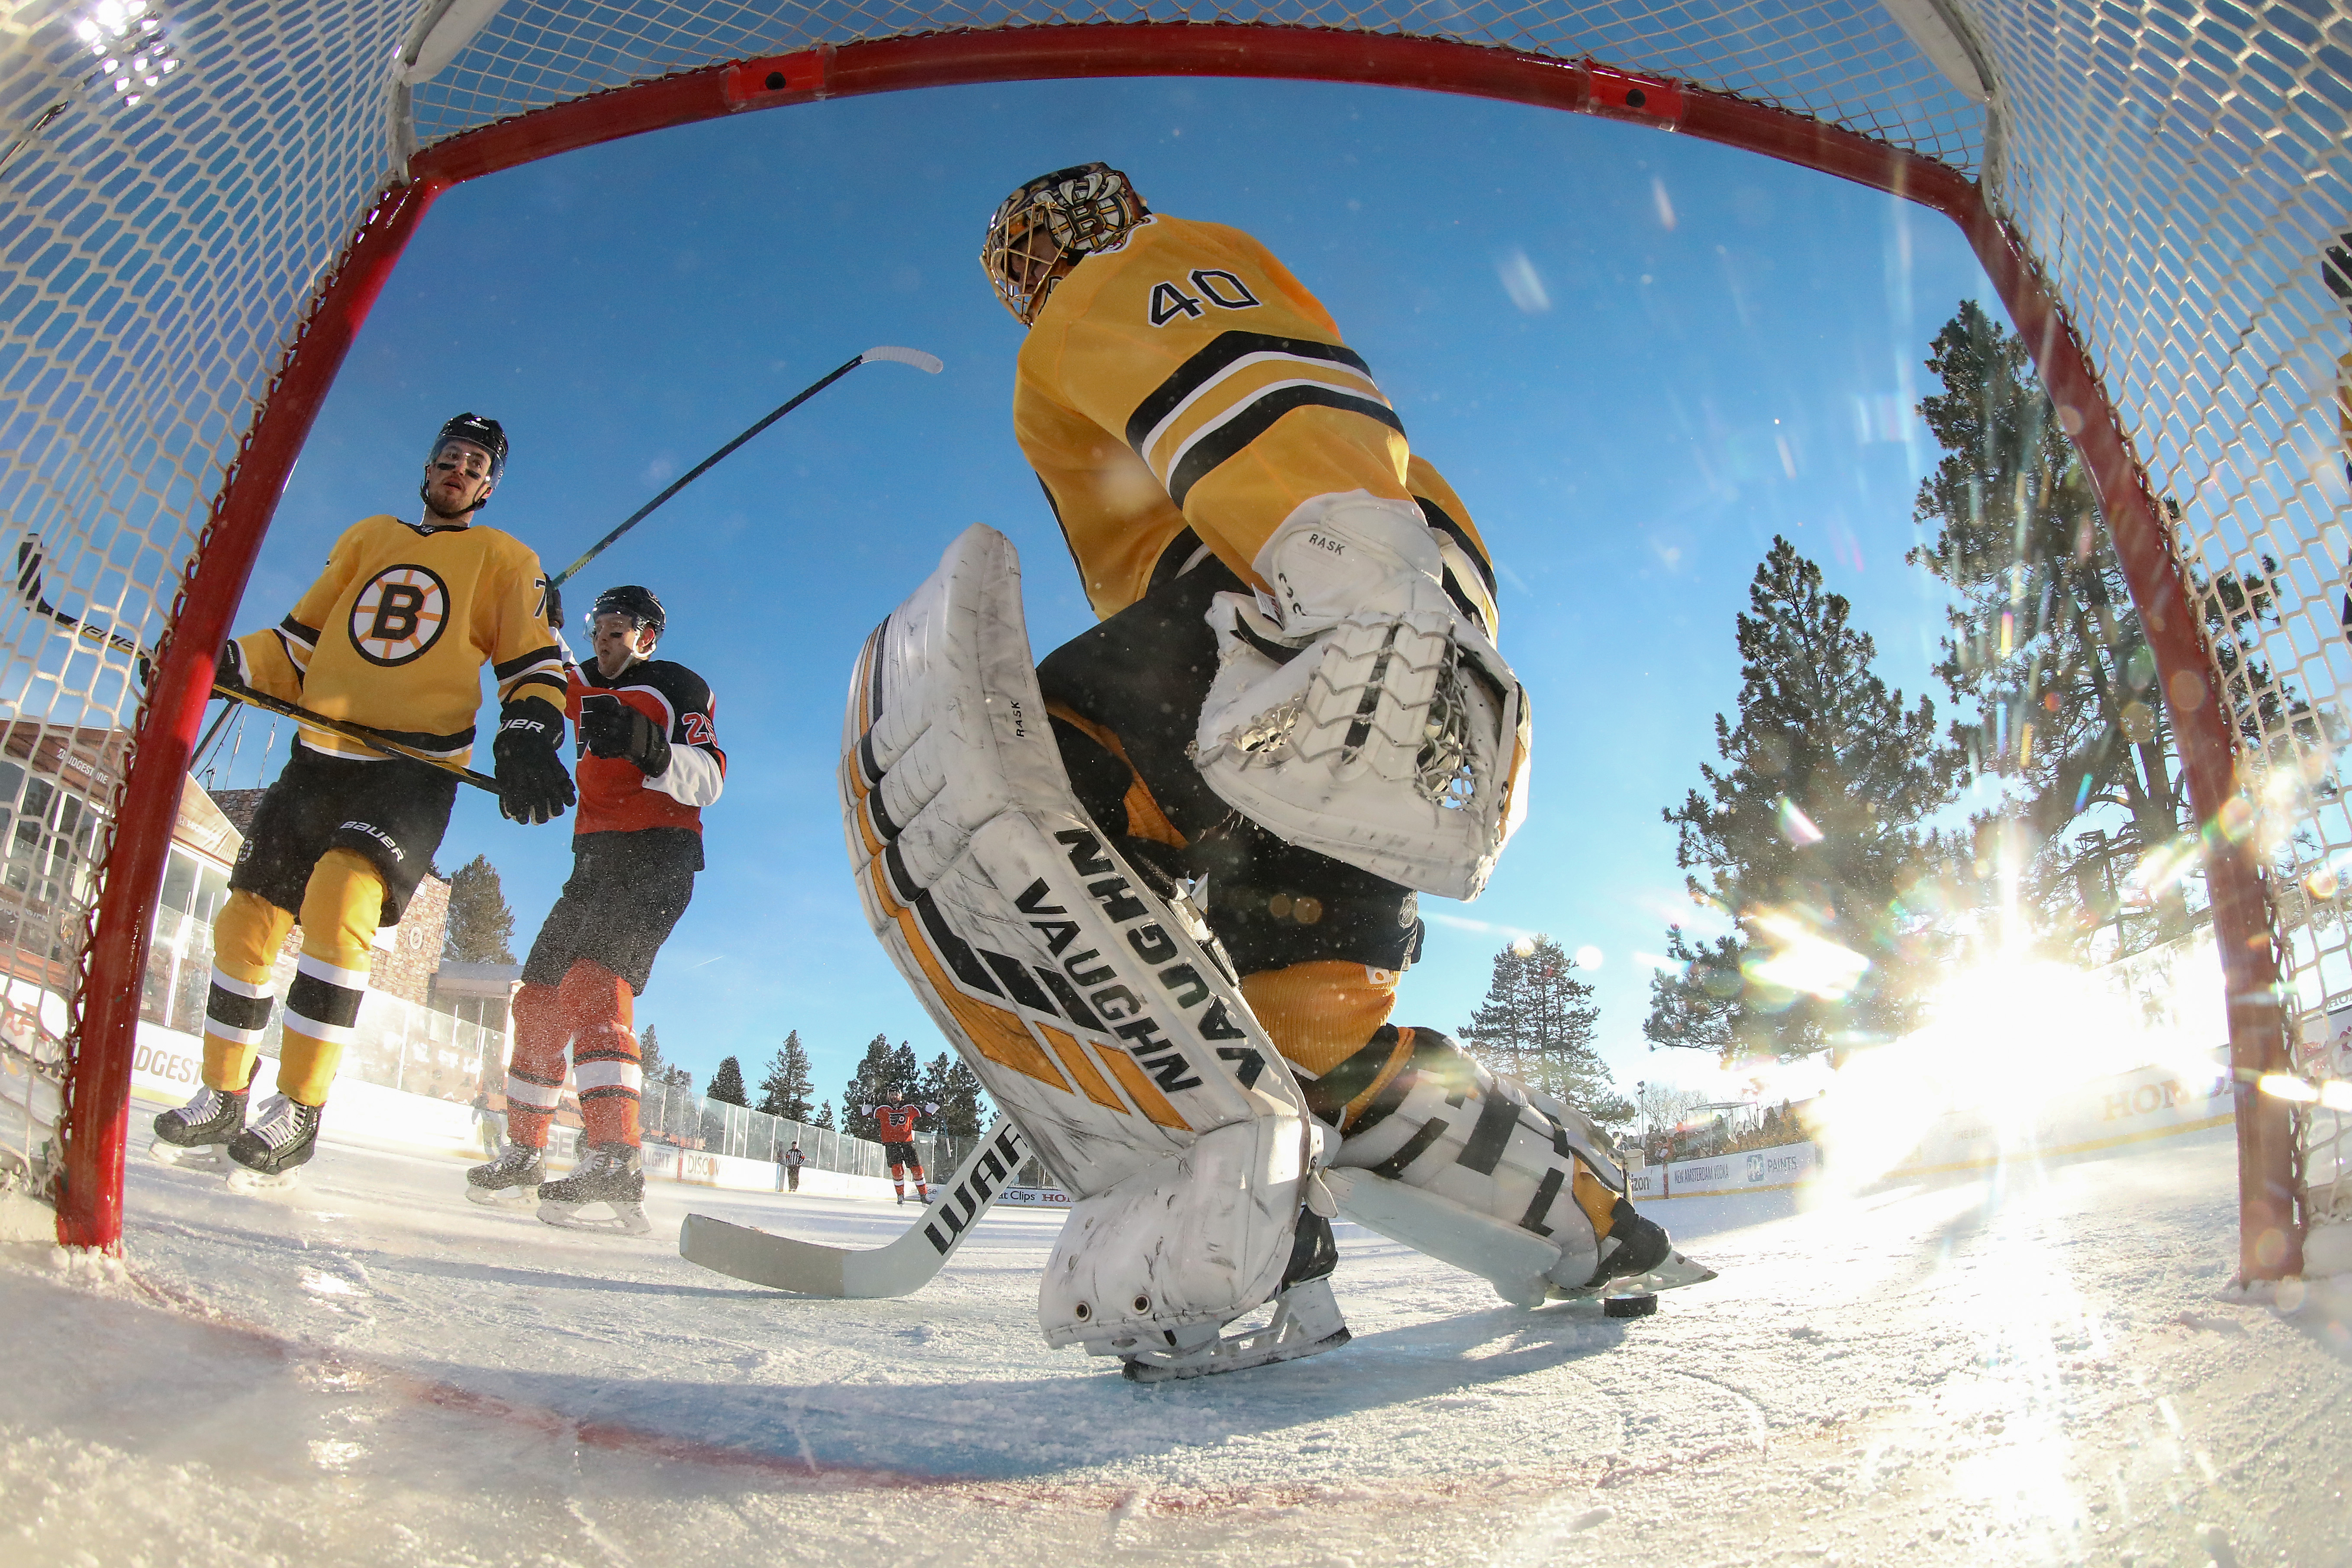 Photos: See what the Bruins' win over the Flyers in picturesque